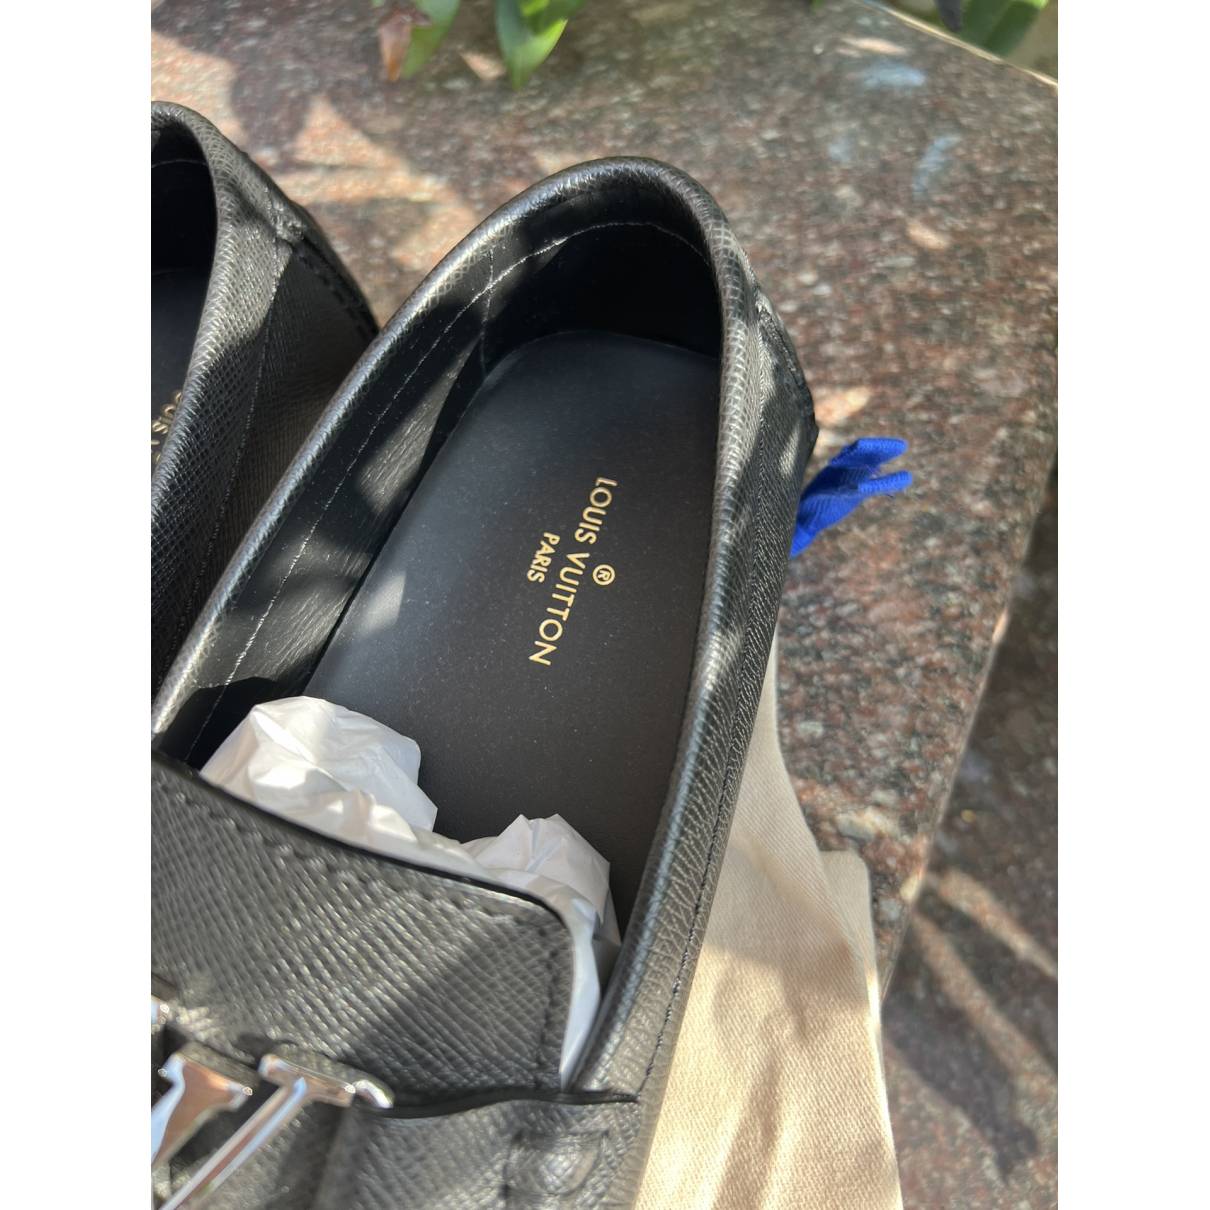 Monte carlo leather flats Louis Vuitton Black size 8.5 UK in